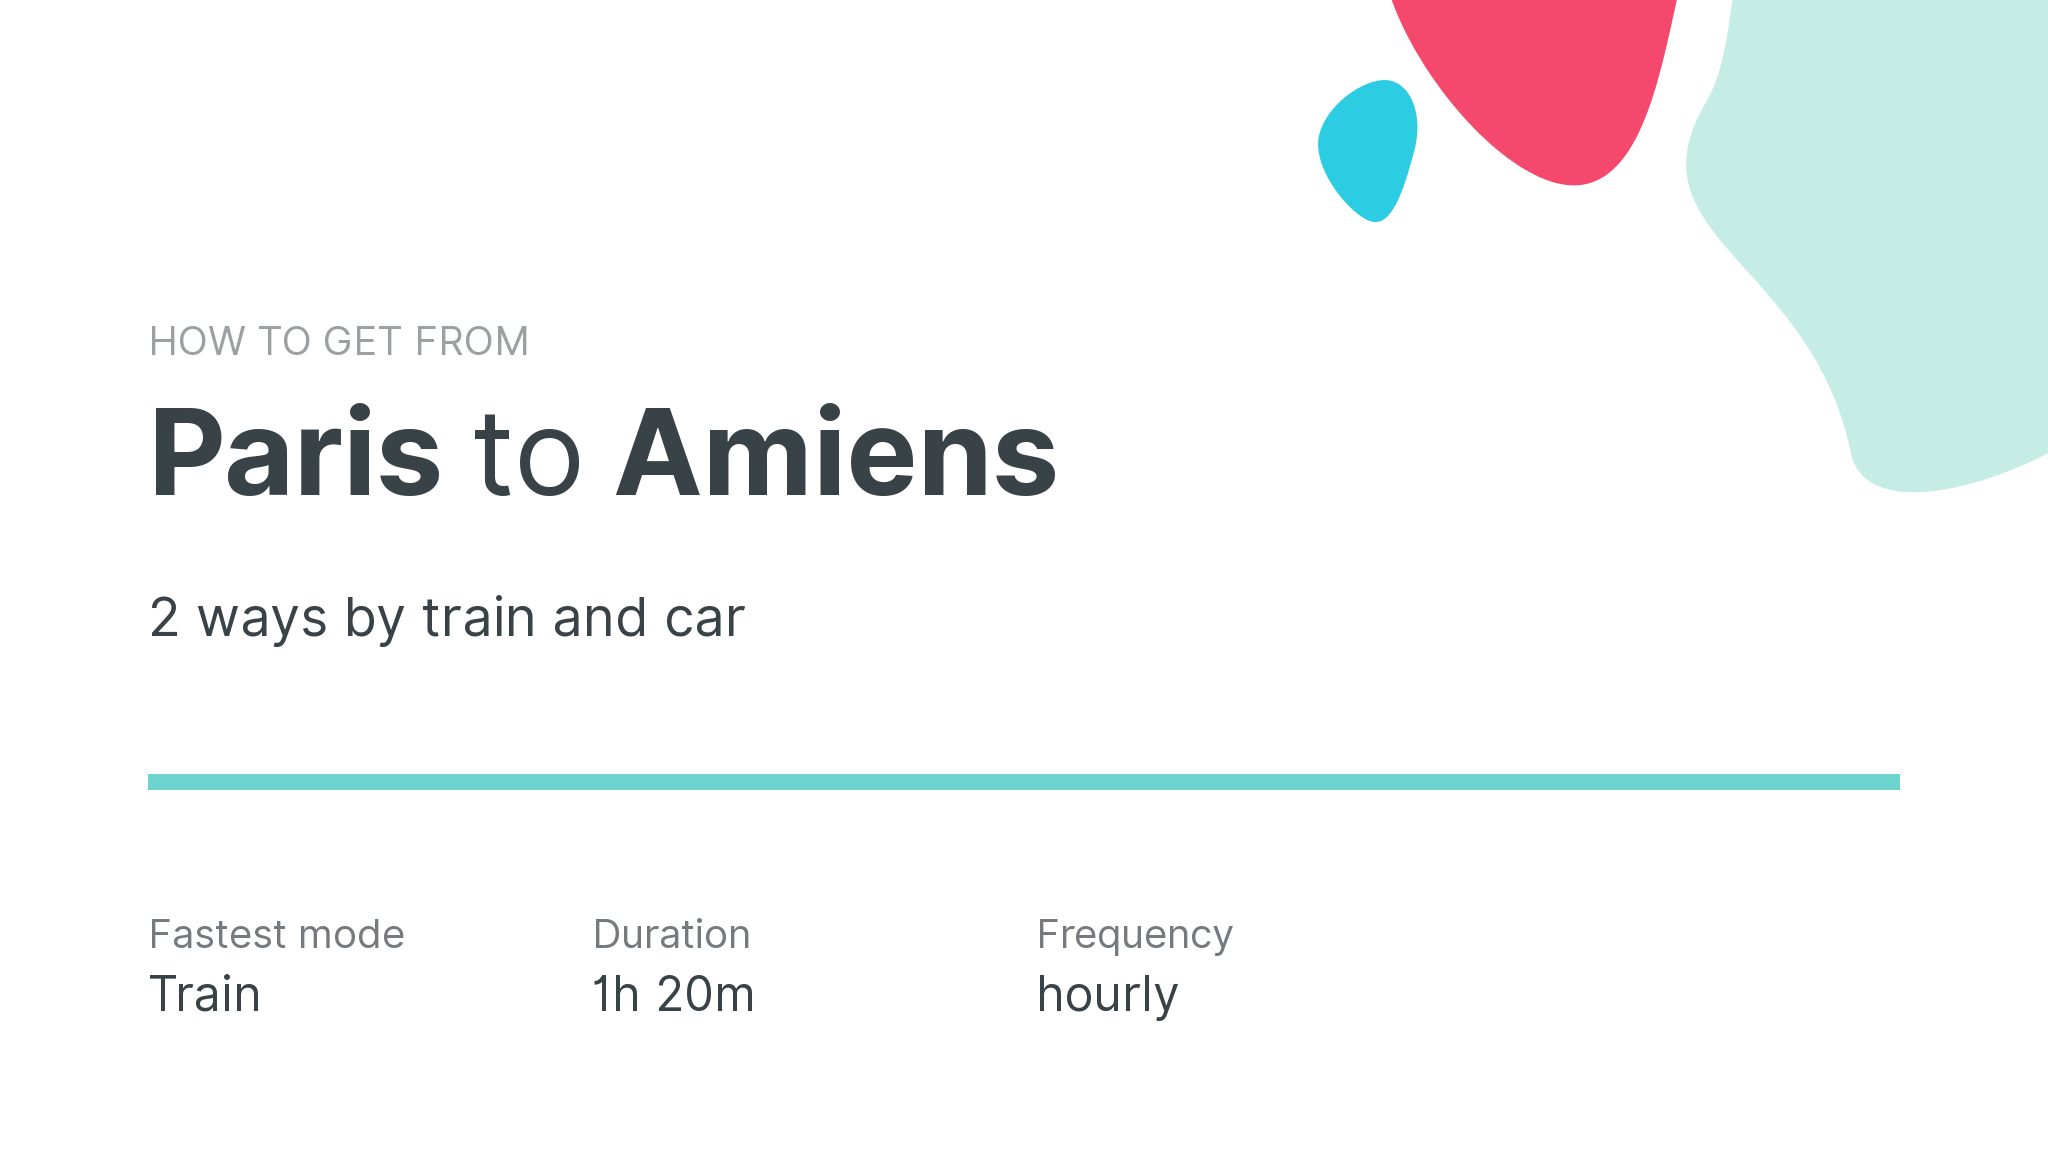 How do I get from Paris to Amiens